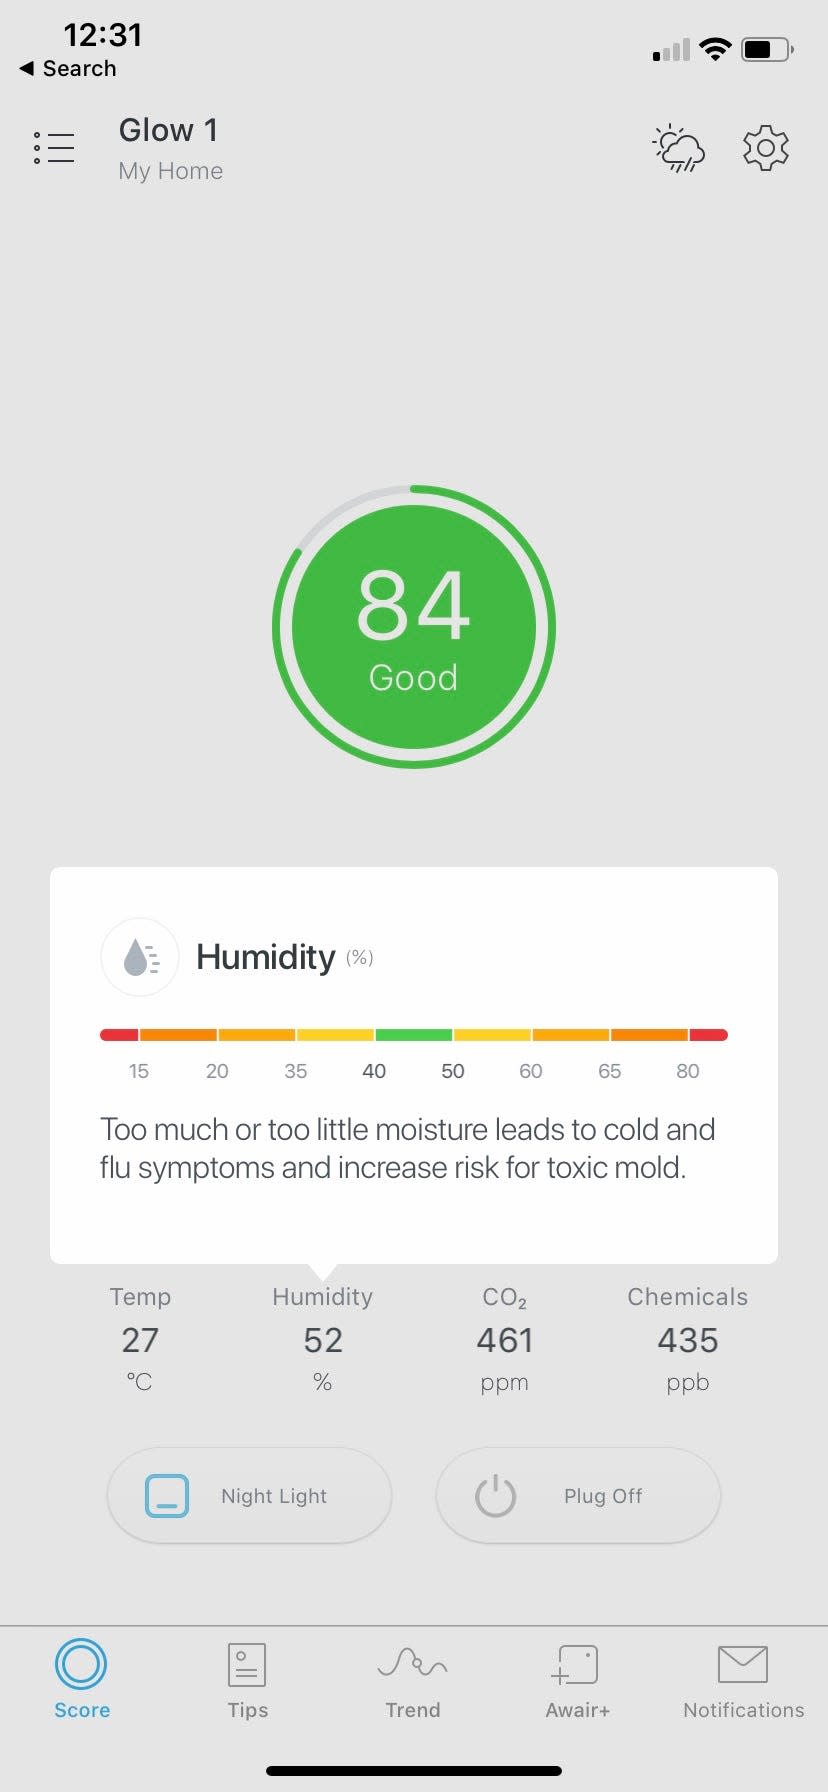 The Awair Glow C mobile app shows good air quality overall, but warns about rising humidity.